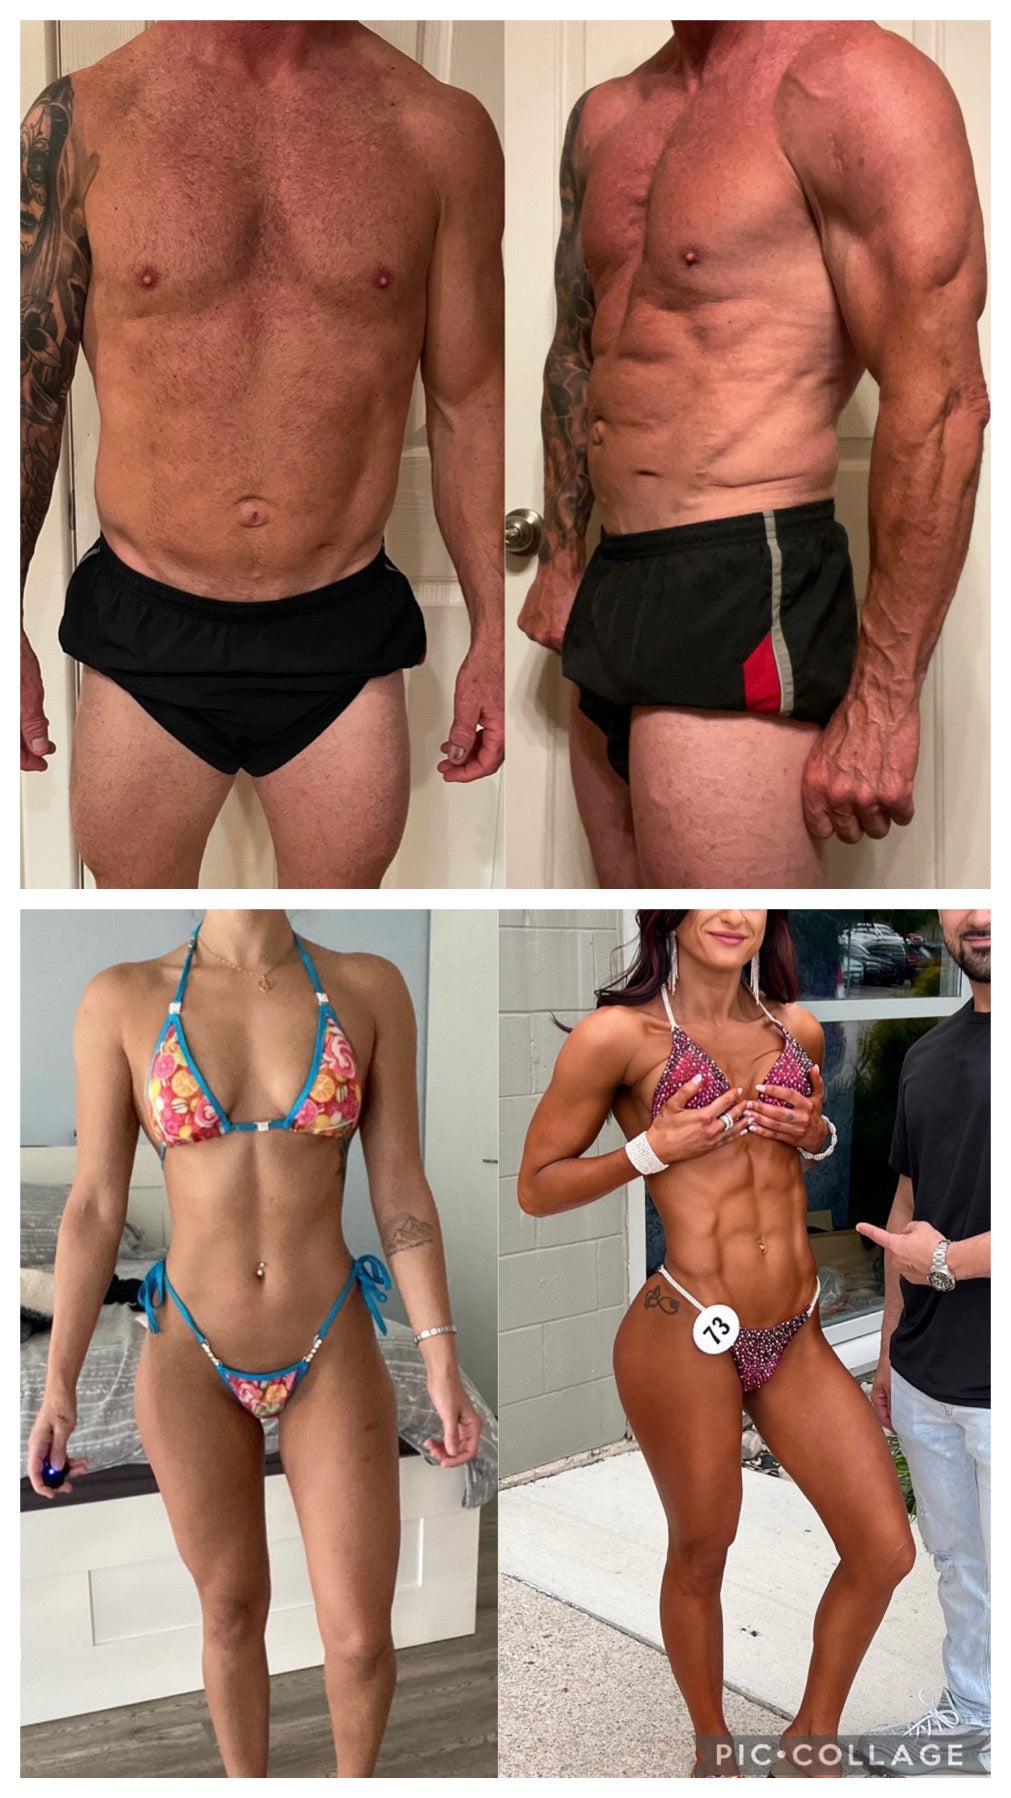 Compilation of one woman and one man who have all gone through health and body improvements at the DeMelo Fitness gym. Both have significant muscle gain and toned their figures dramatically, showing incredible results